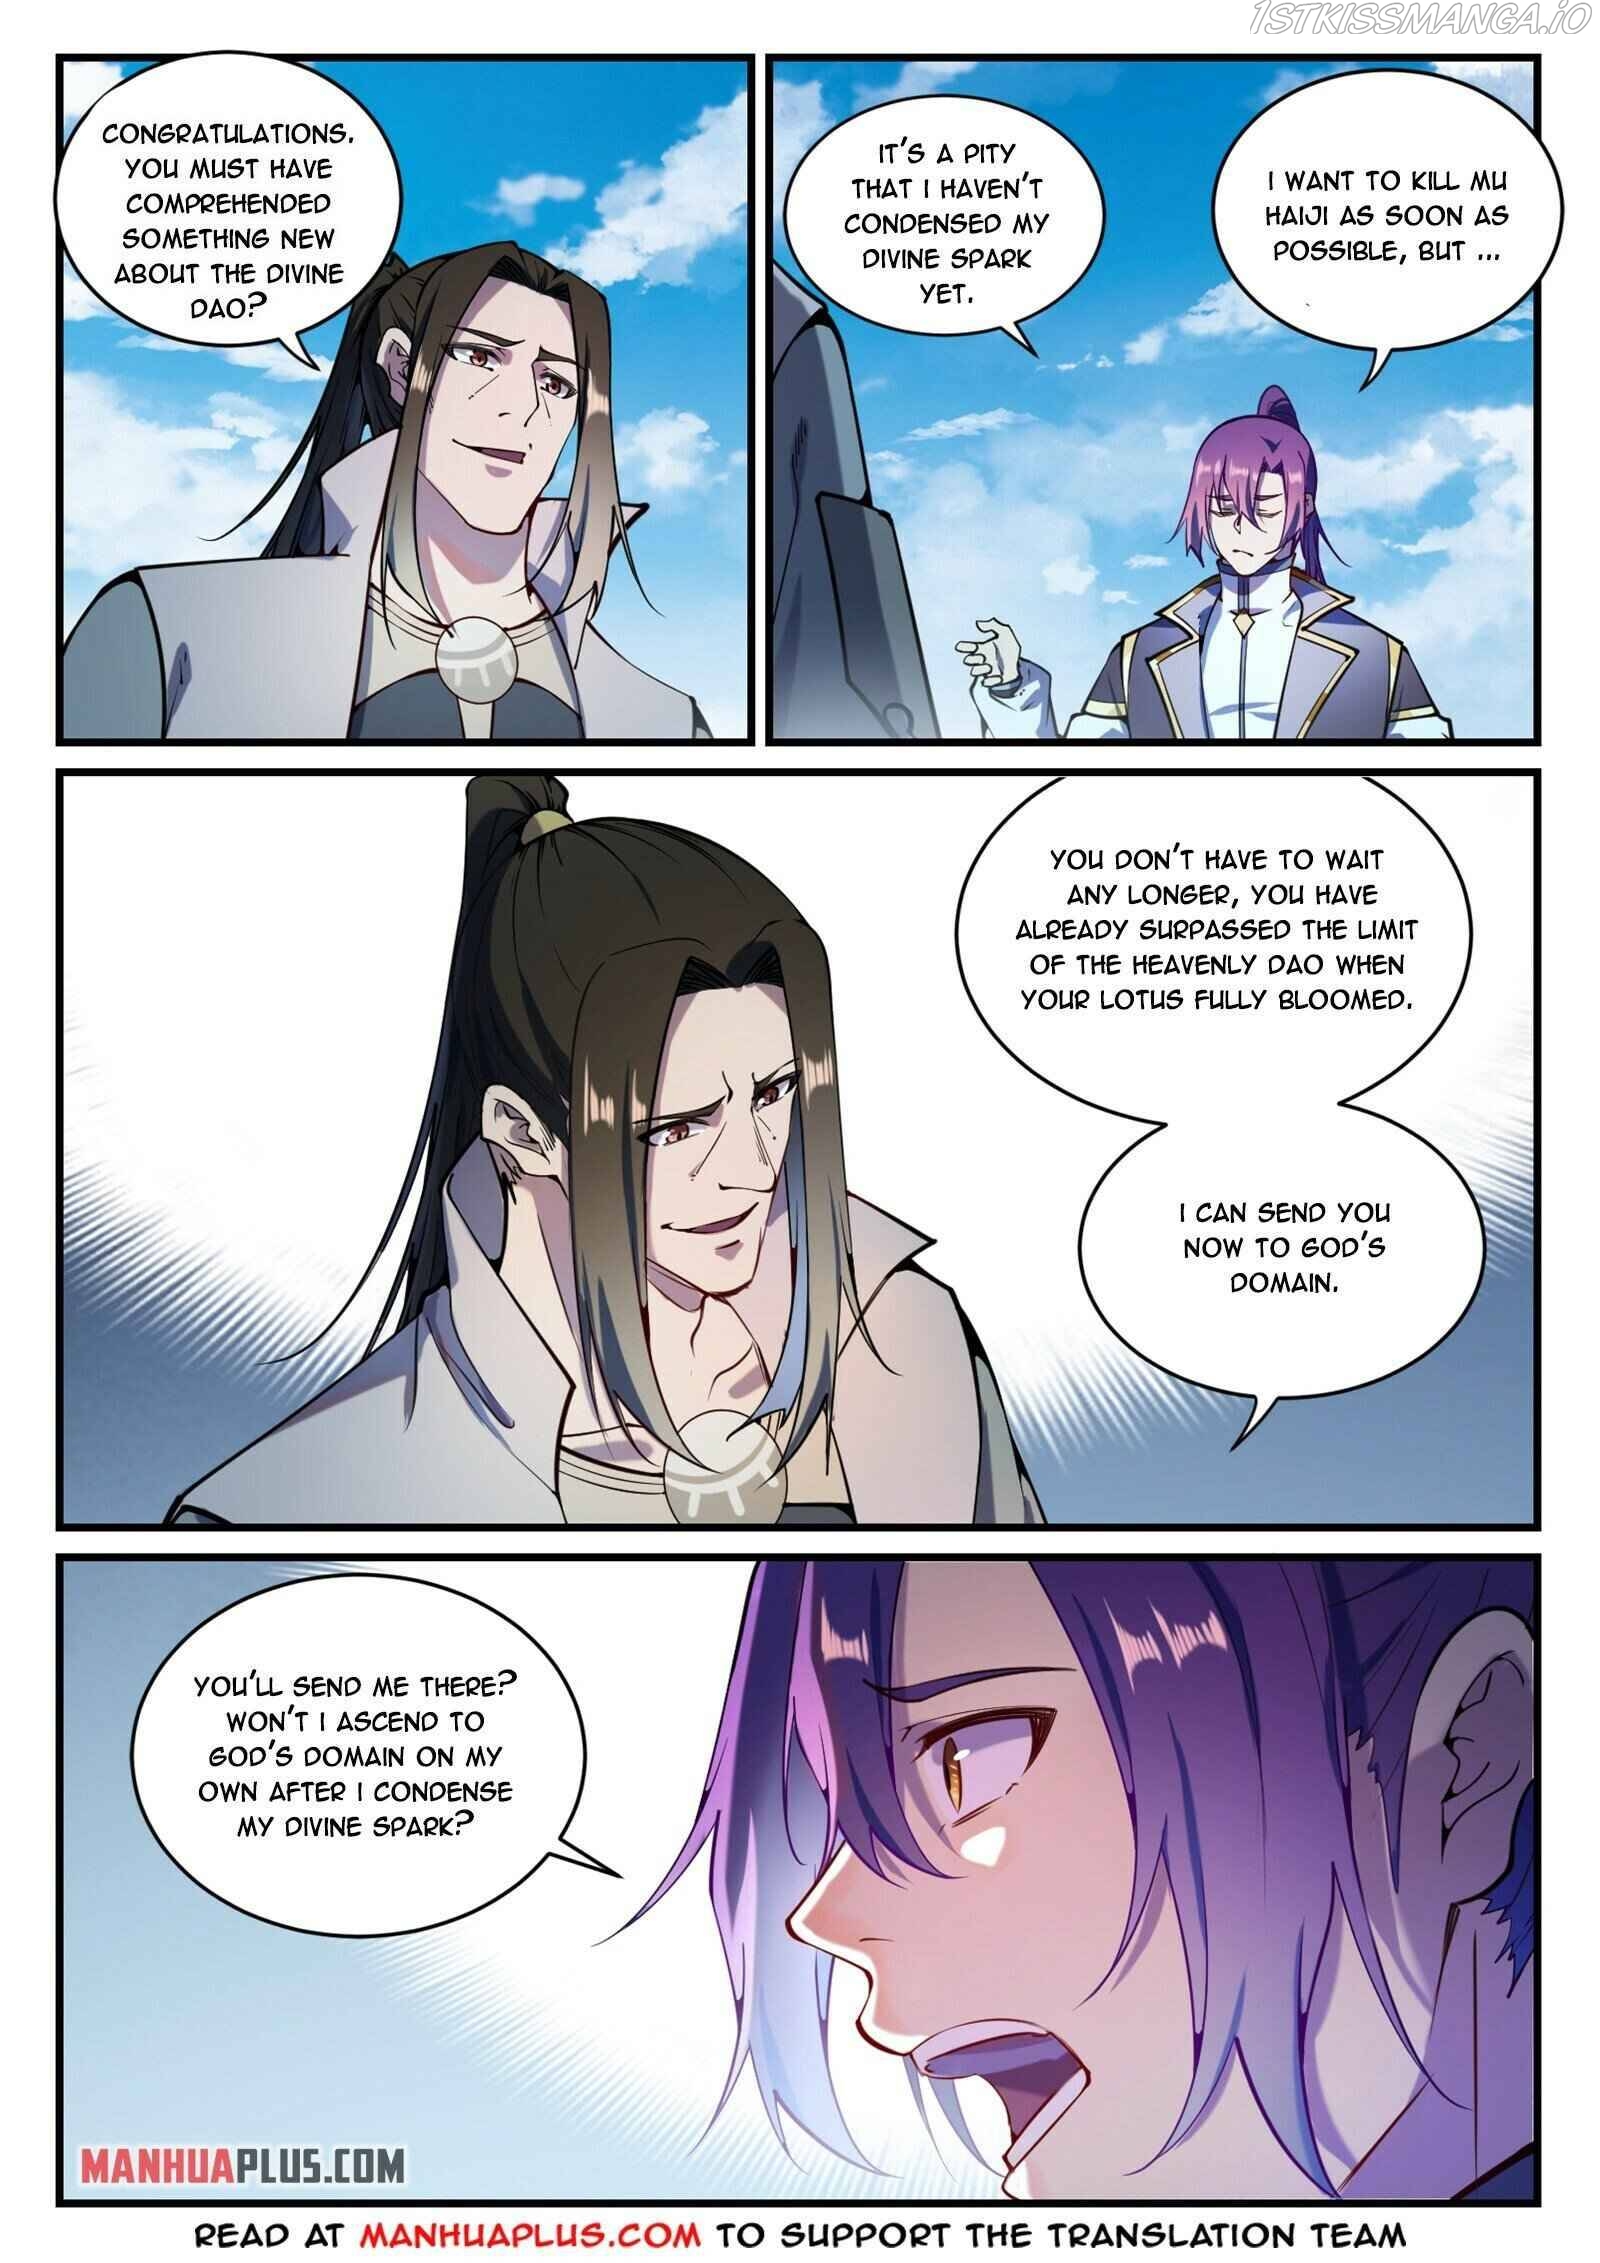 Apotheosis Chapter 838 - Page 1